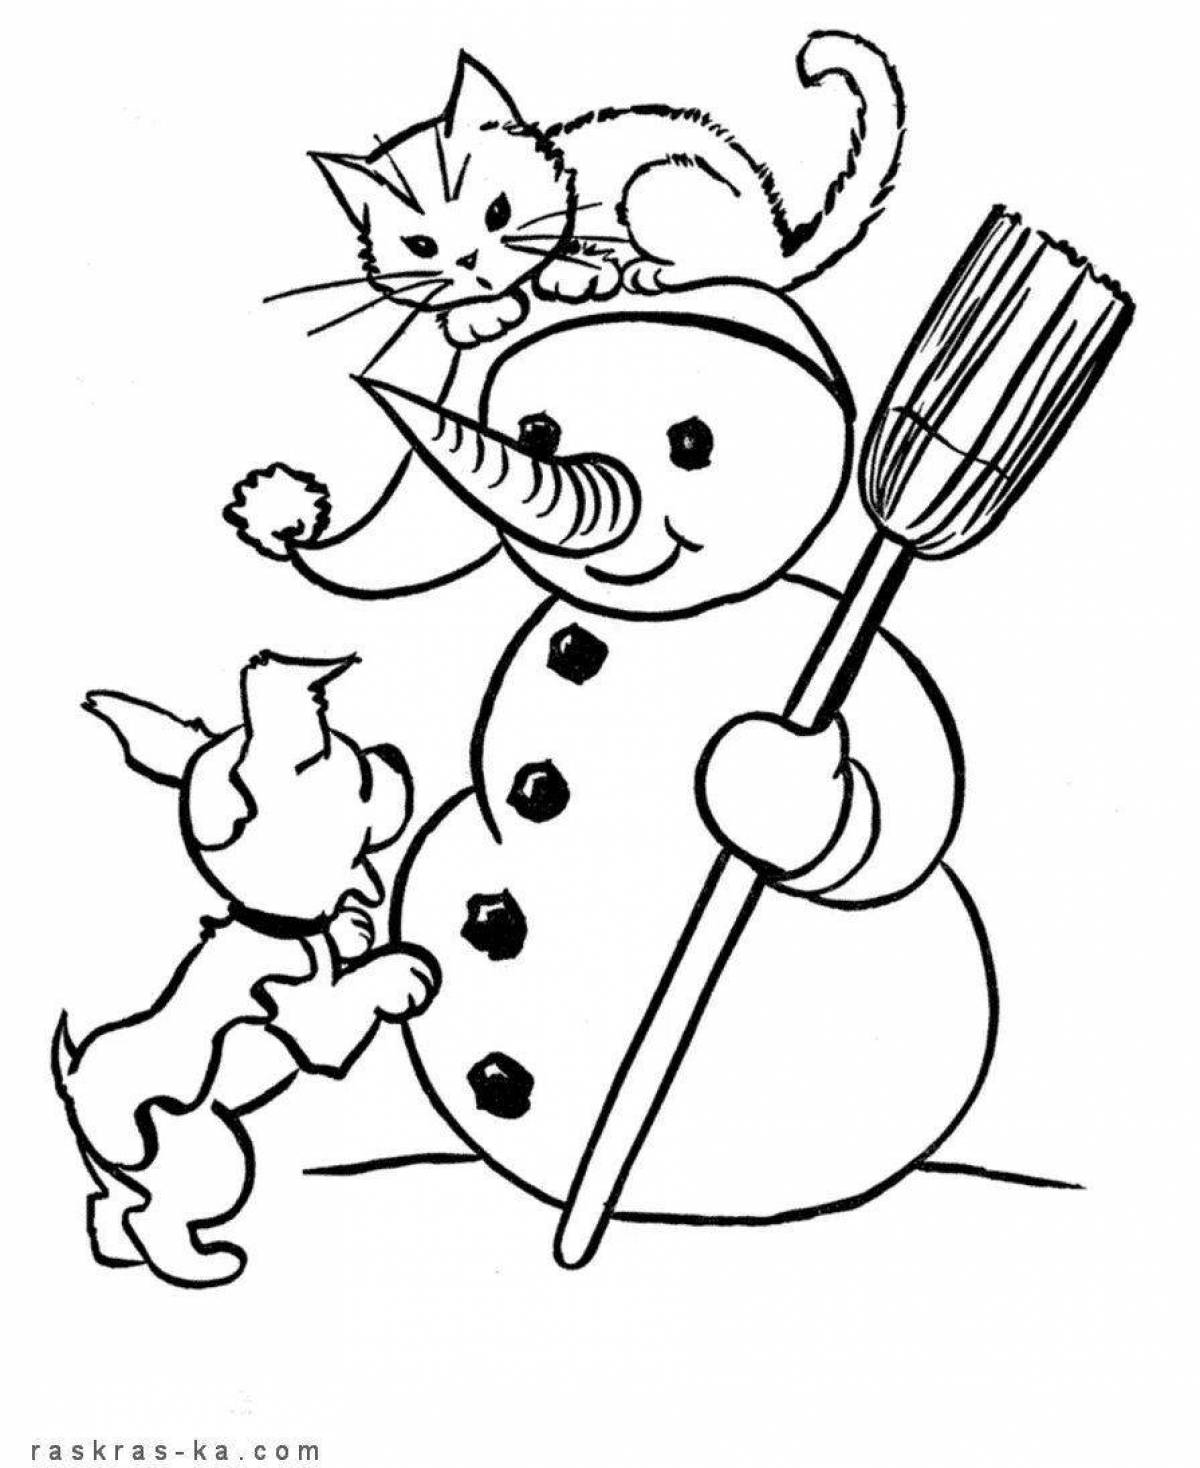 Coloring cat funny new year